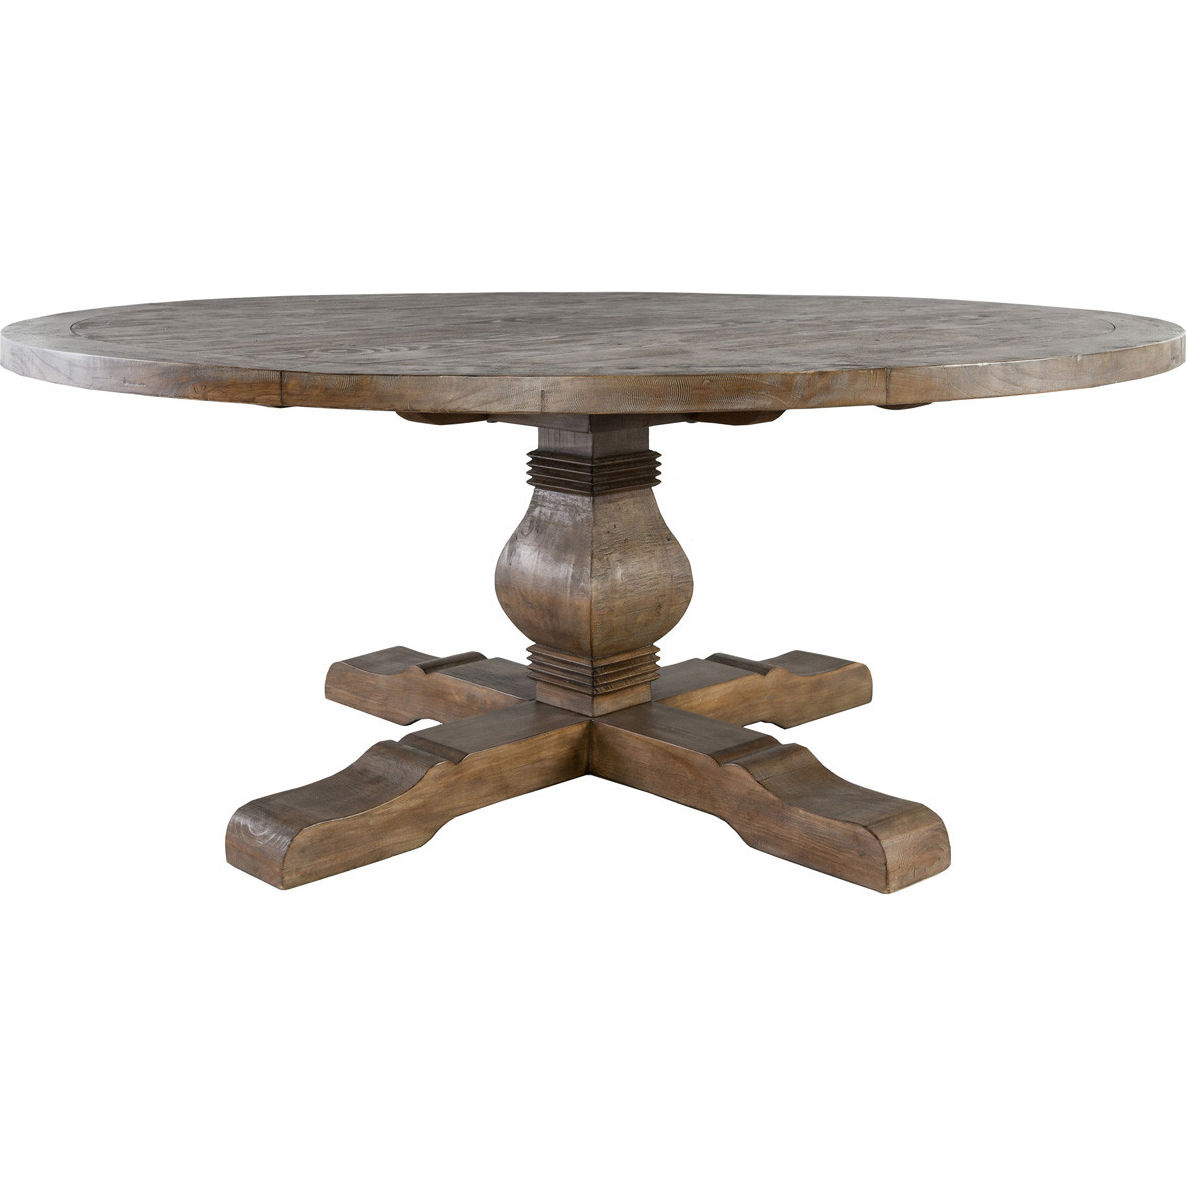 51030969 Caleb 72 Round Dining Table, Reclaimed Pine Round Dining Table